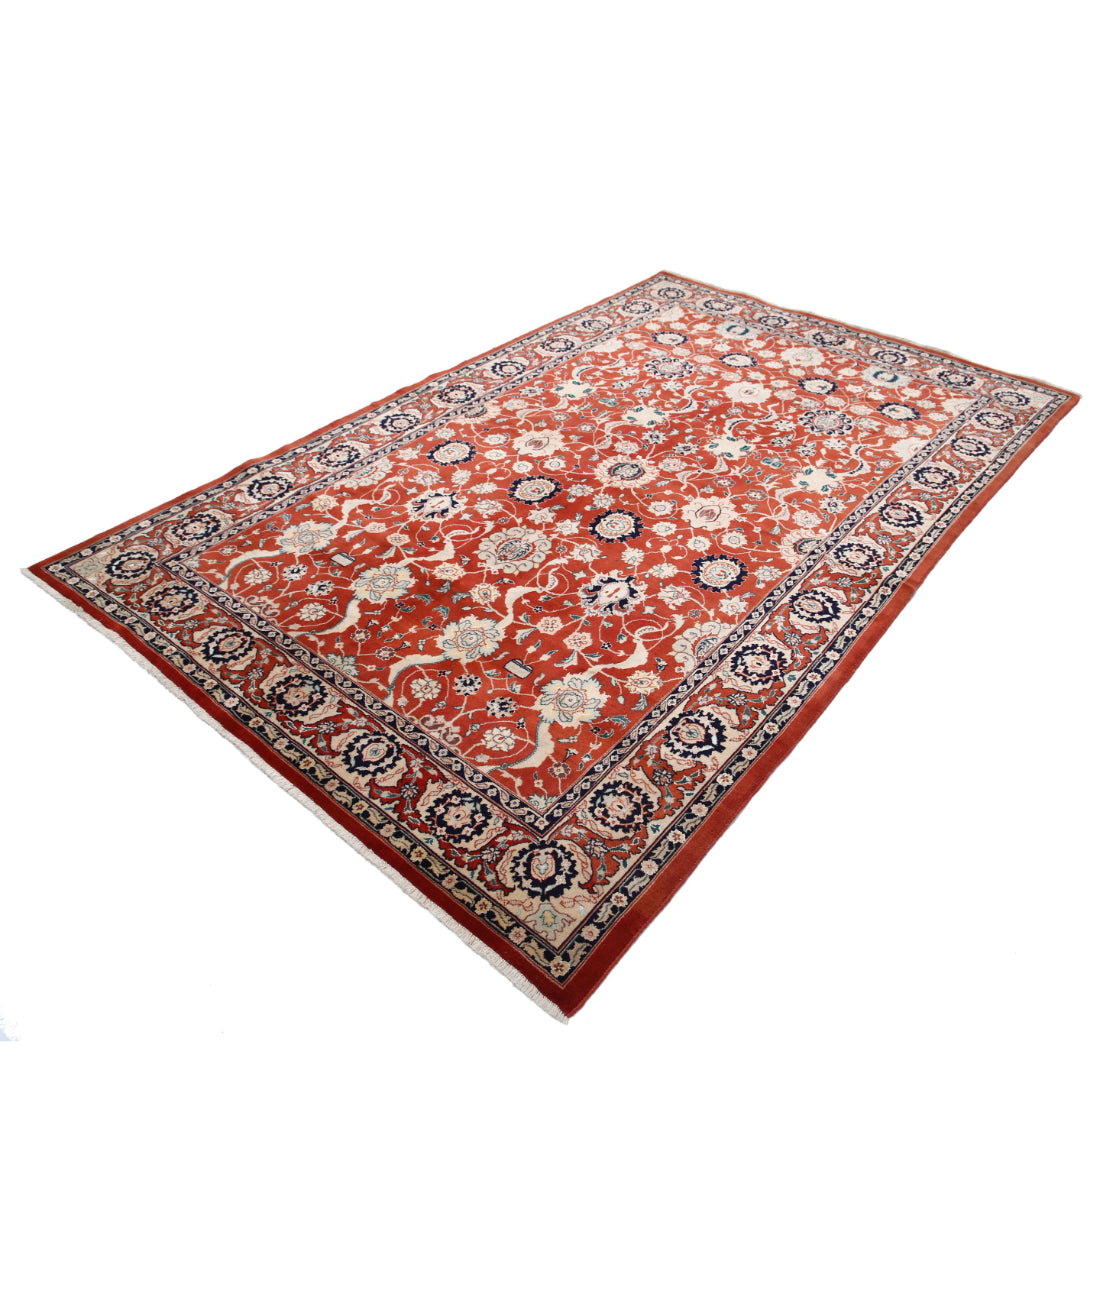 Hand Knotted Persian Tabriz Wool Rug - 5'8'' x 8'10'' 5'8'' x 8'10'' (170 X 265) / Red / Red